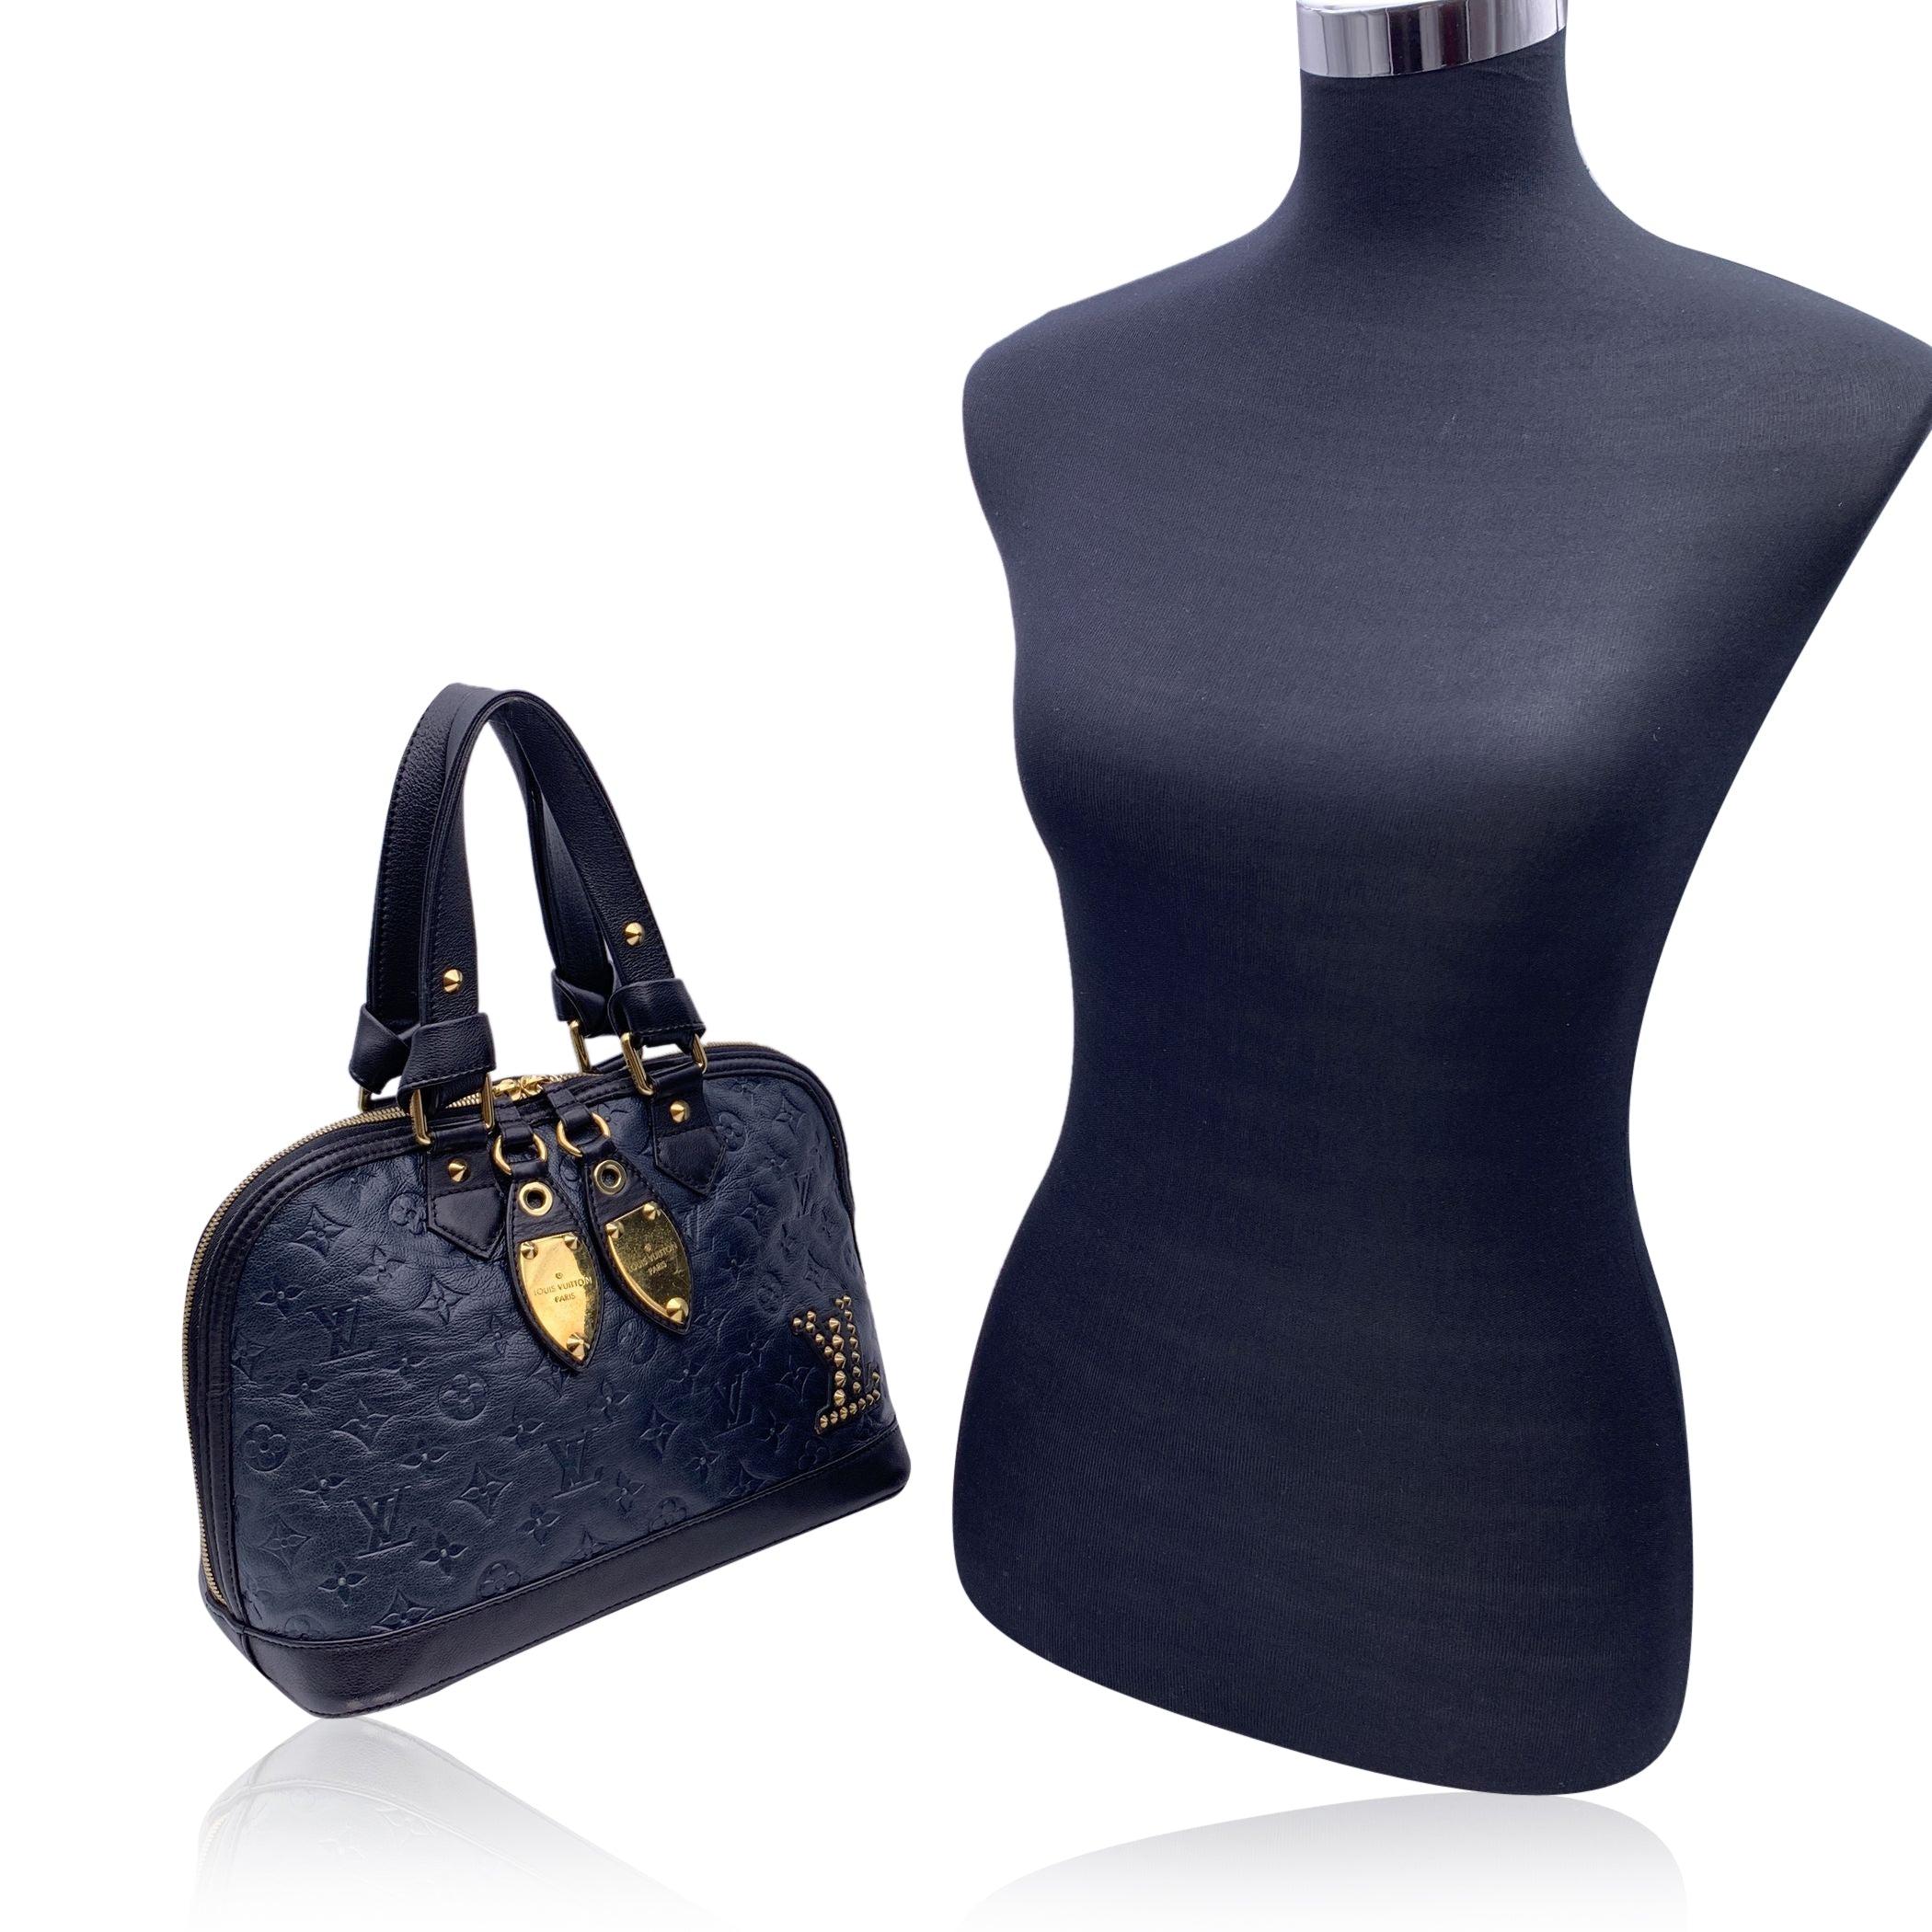 This beautiful Bag will come with a Certificate of Authenticity provided by Entrupy. The certificate will be provided at no further cost Louis Vuitton Neo Alma 'DoubleJeu' limited edition bag. Made of petrol blue and black leather. Monogram